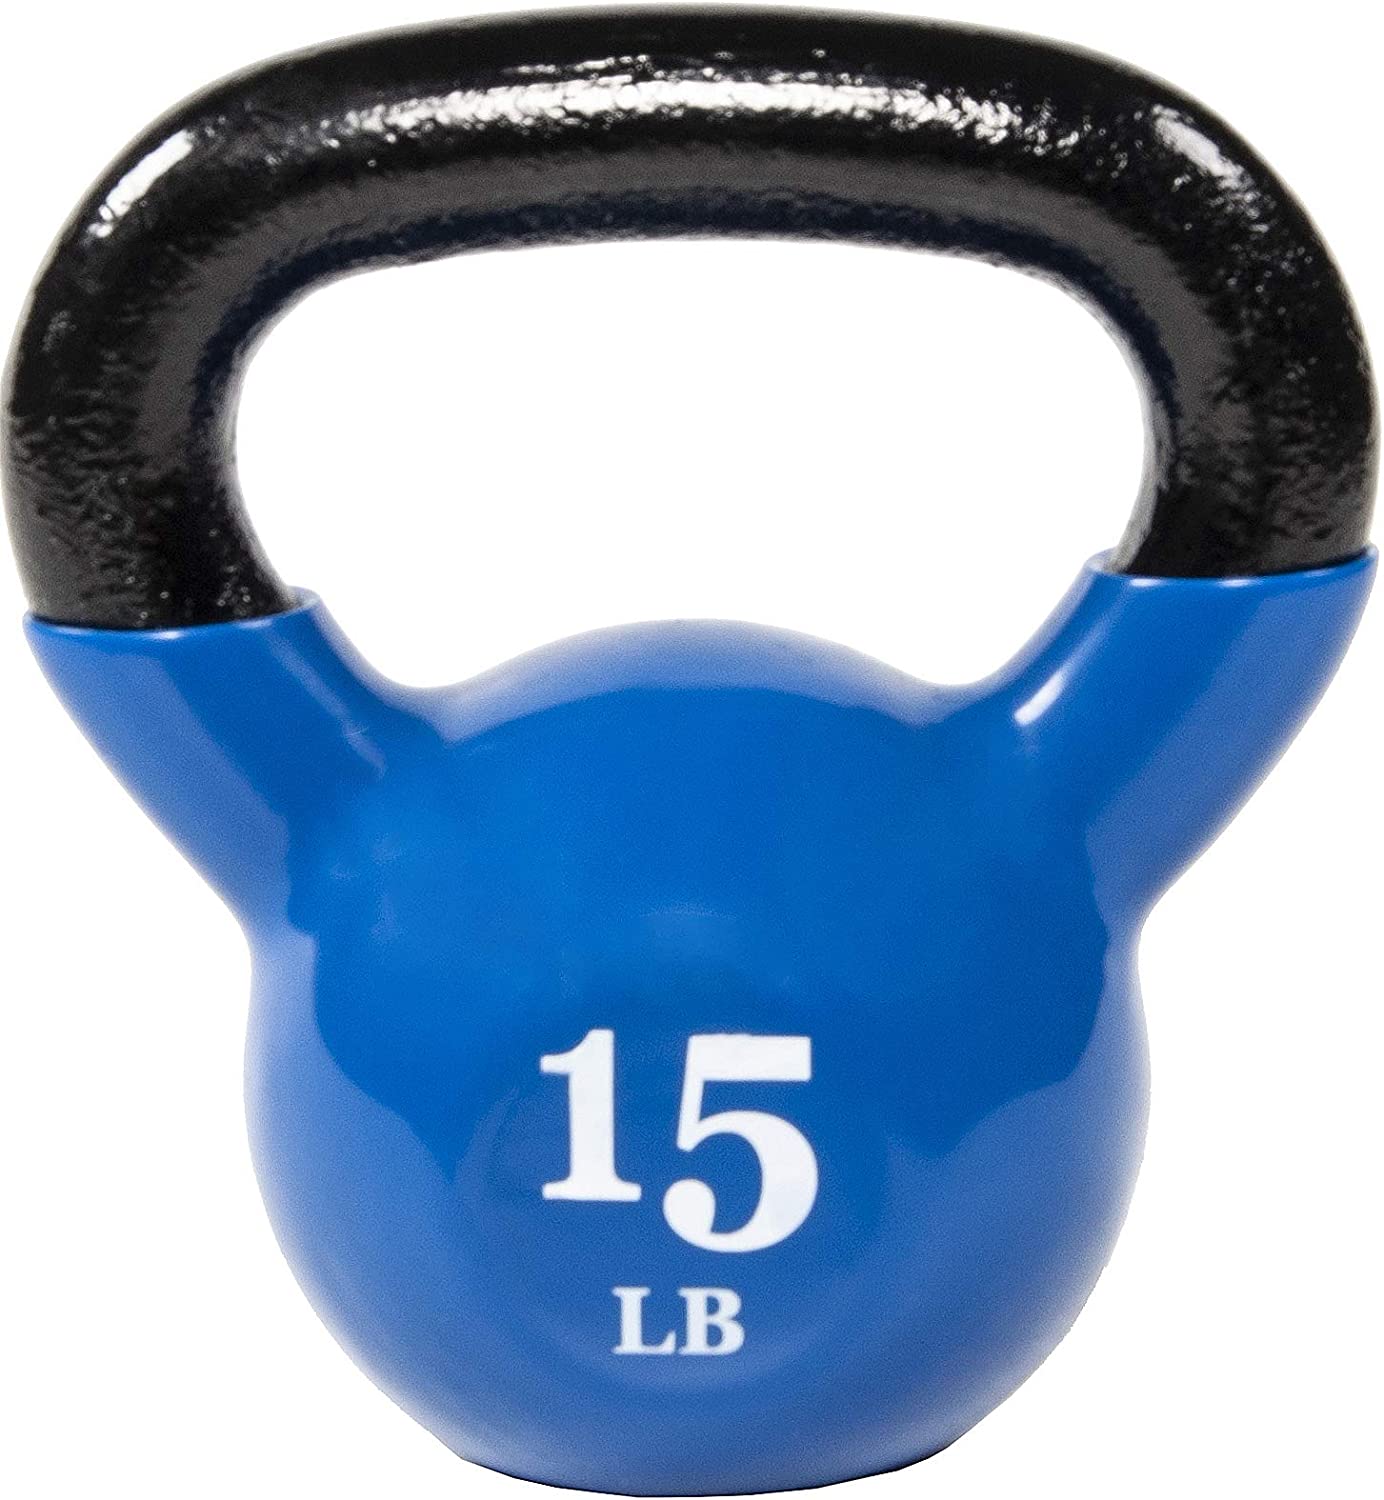 BalanceFrom Everyday Essentials All-Purpose Vinyl Color Coated Kettlebell (10-lb) $10 + Free Shipping w/ Prime or on $25+